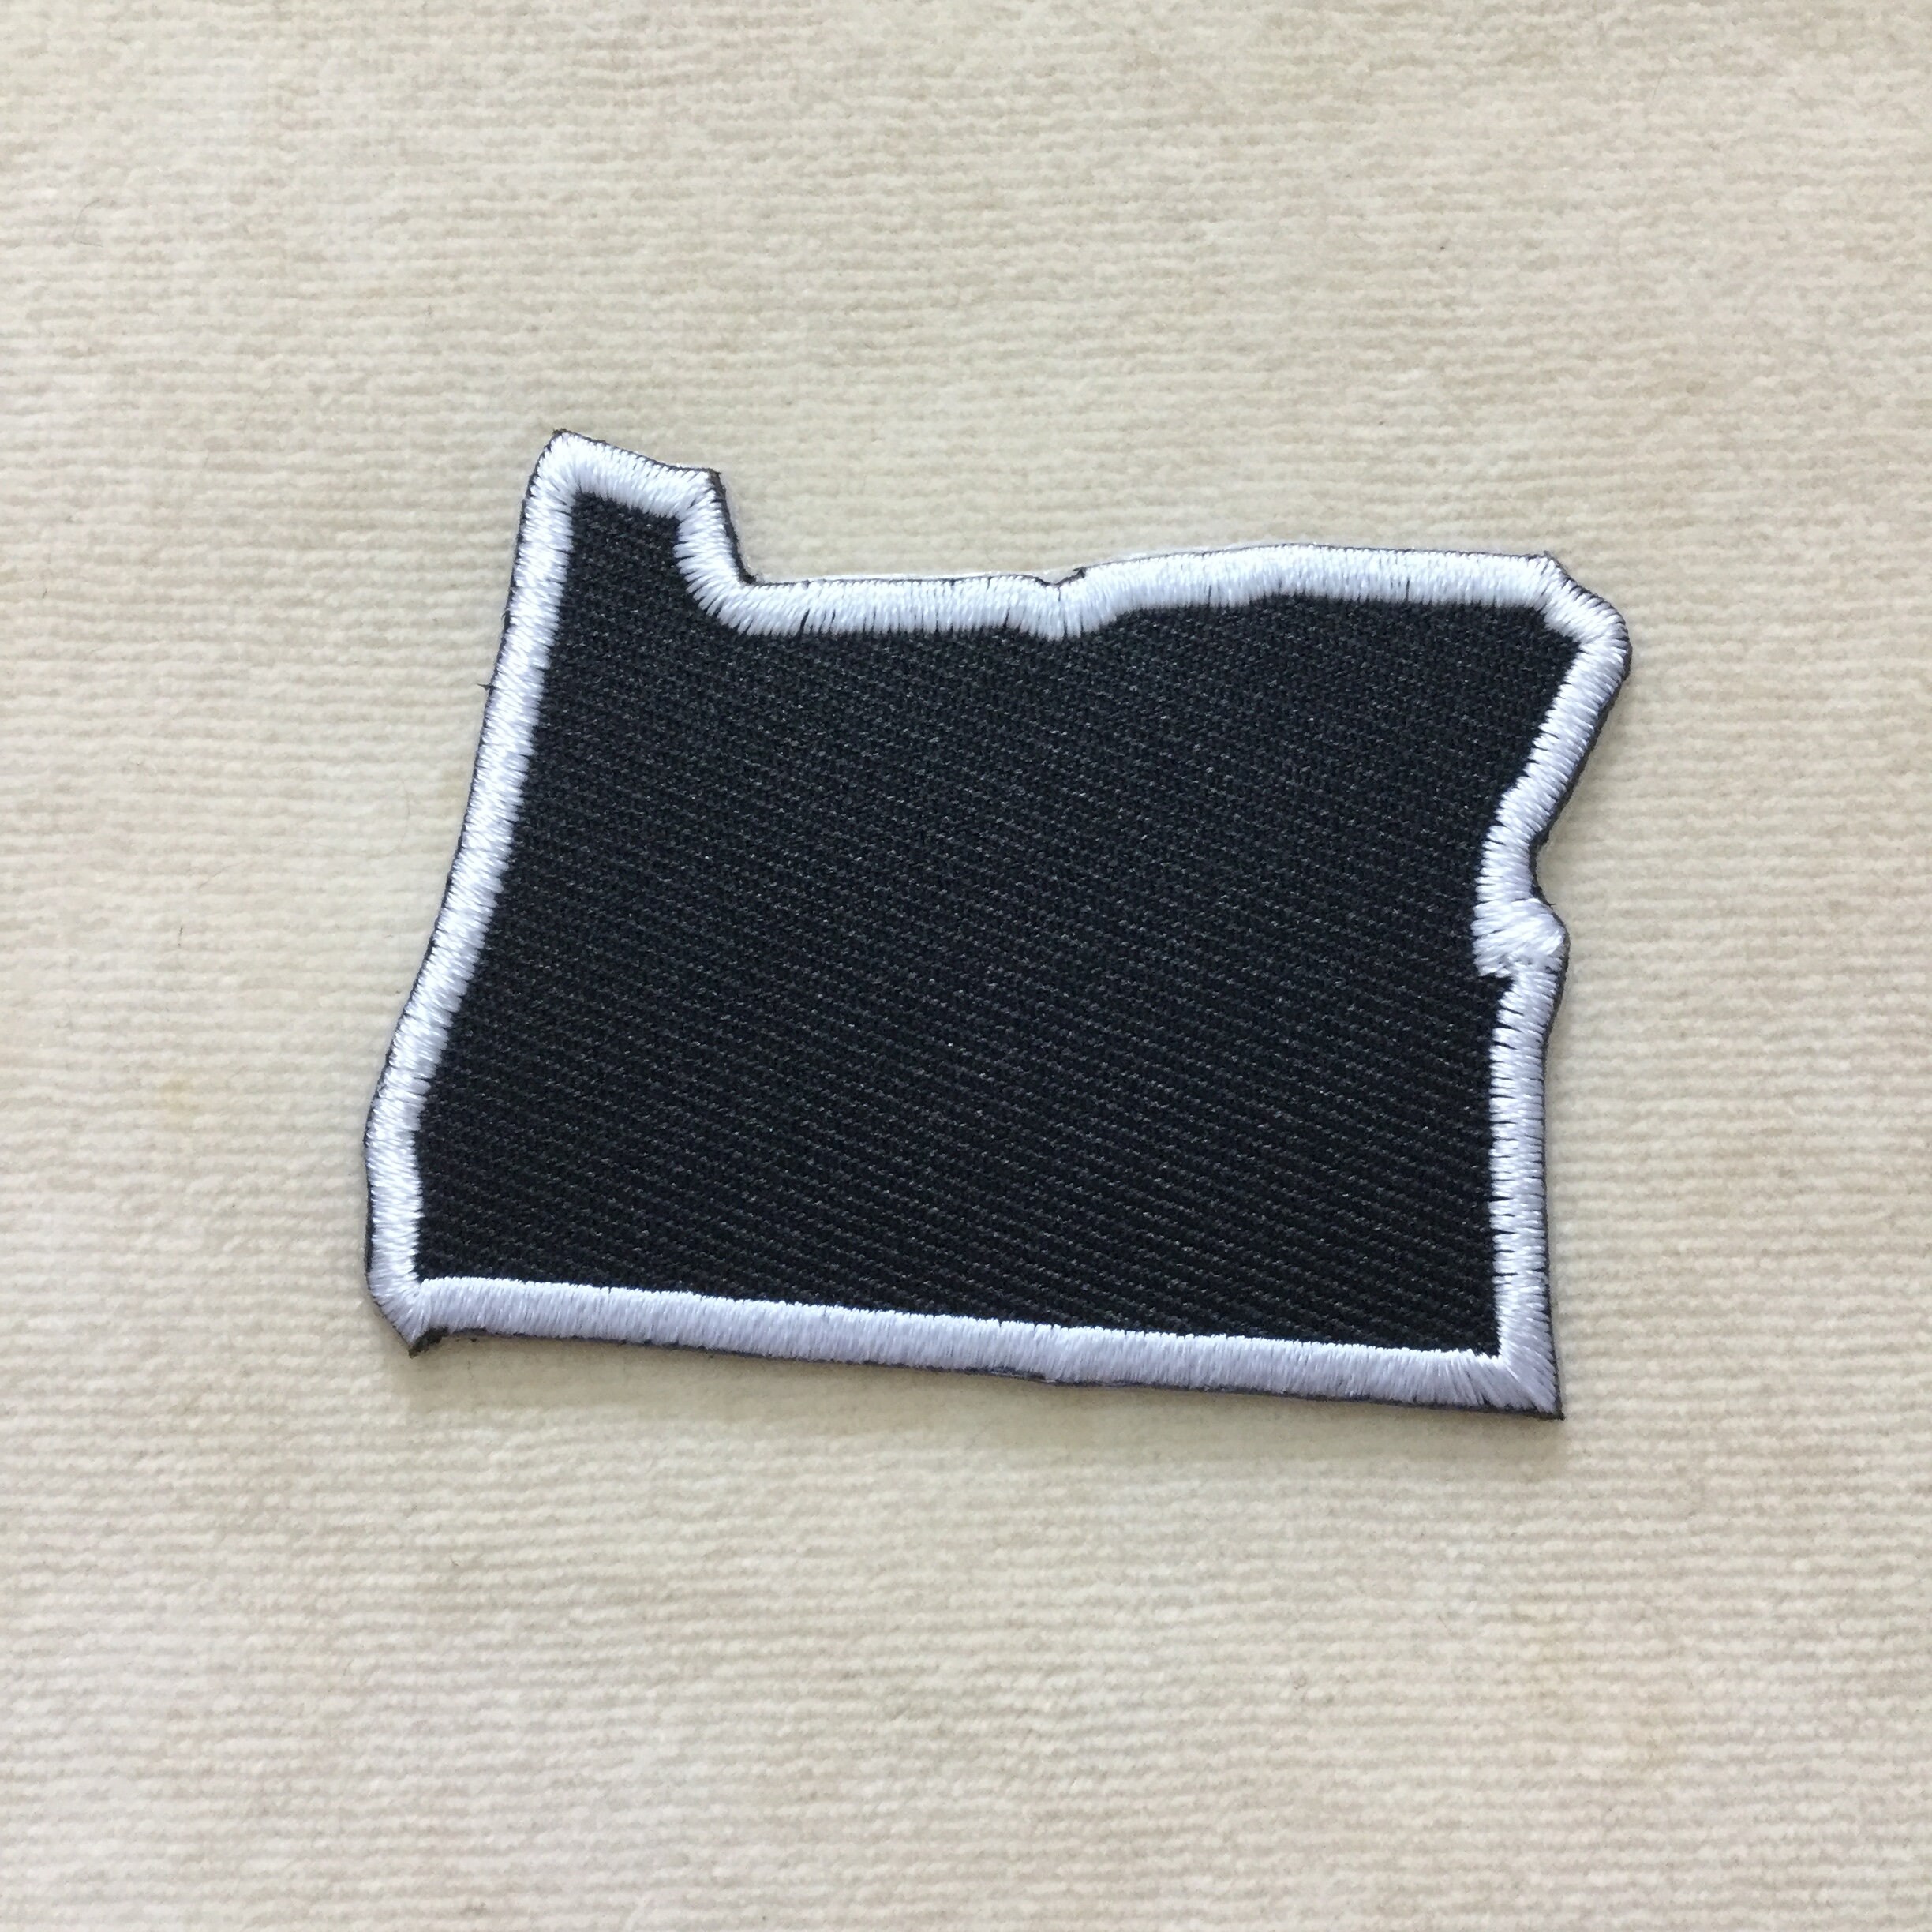  PatchStop State of Oregon Iron On Patches for Clothing